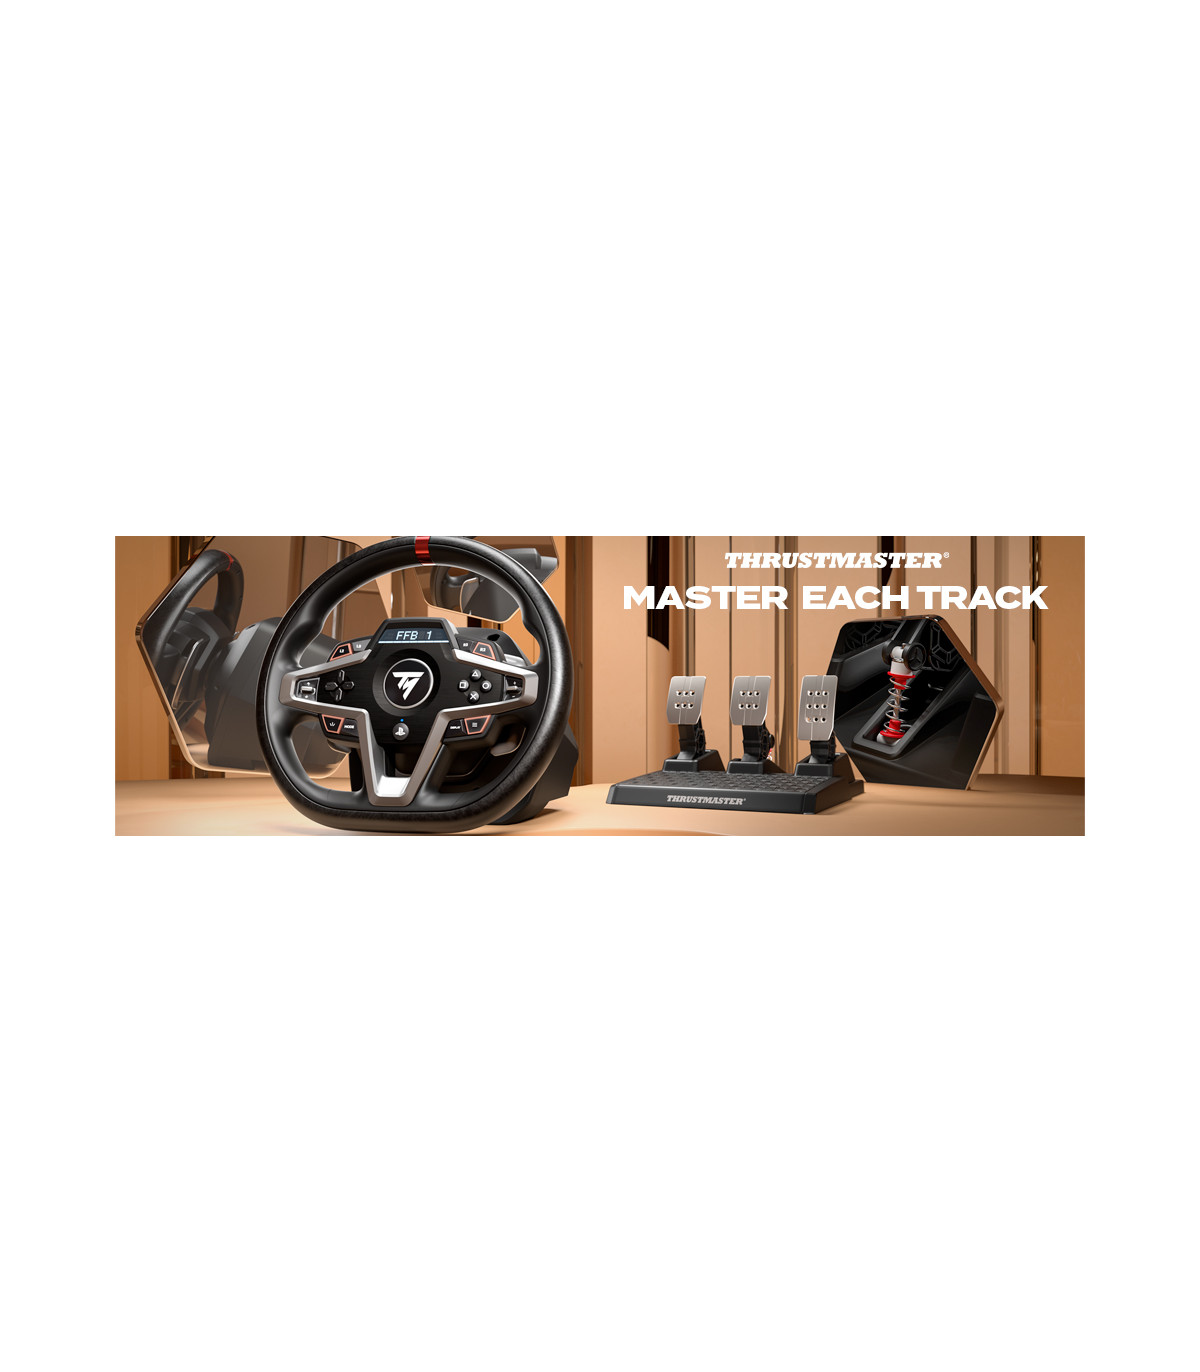 THRUSTMASTER VOLANTE + PEDALES T248 PARA PS5 / PS4 / PC